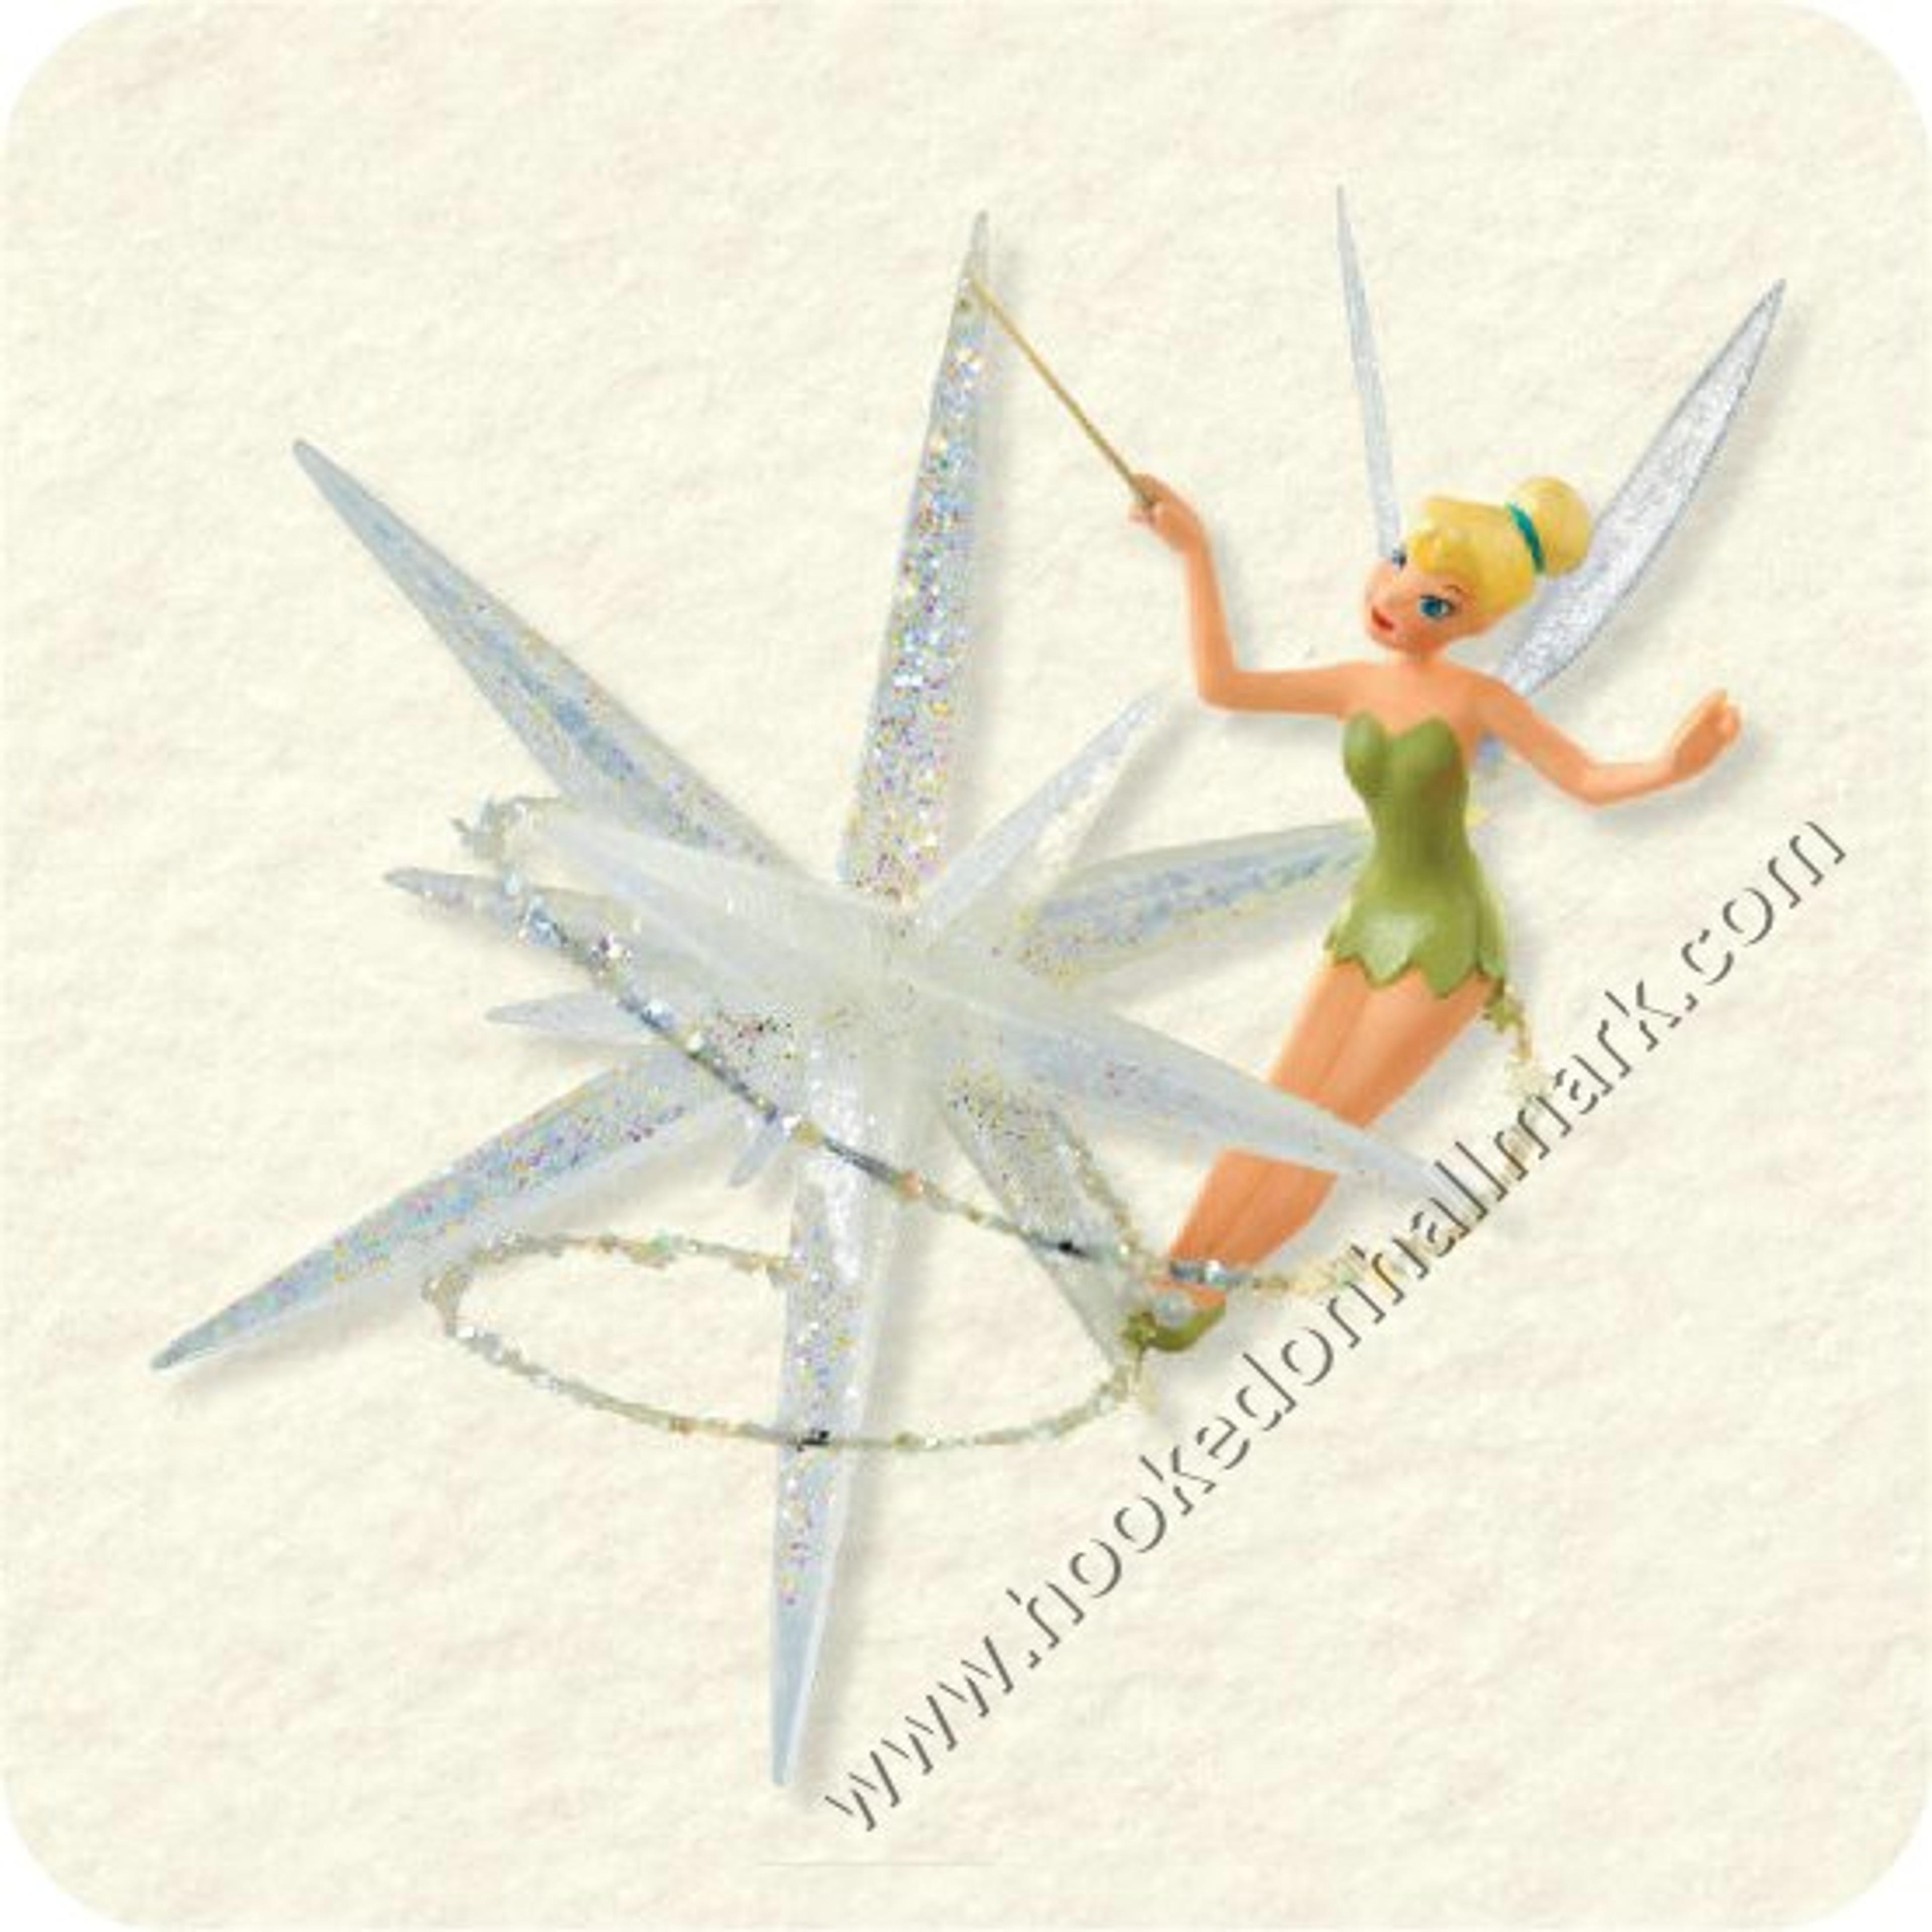 2008 A Touch of Tink Hallmark Ornament at Hooked on Hallmark Ornaments